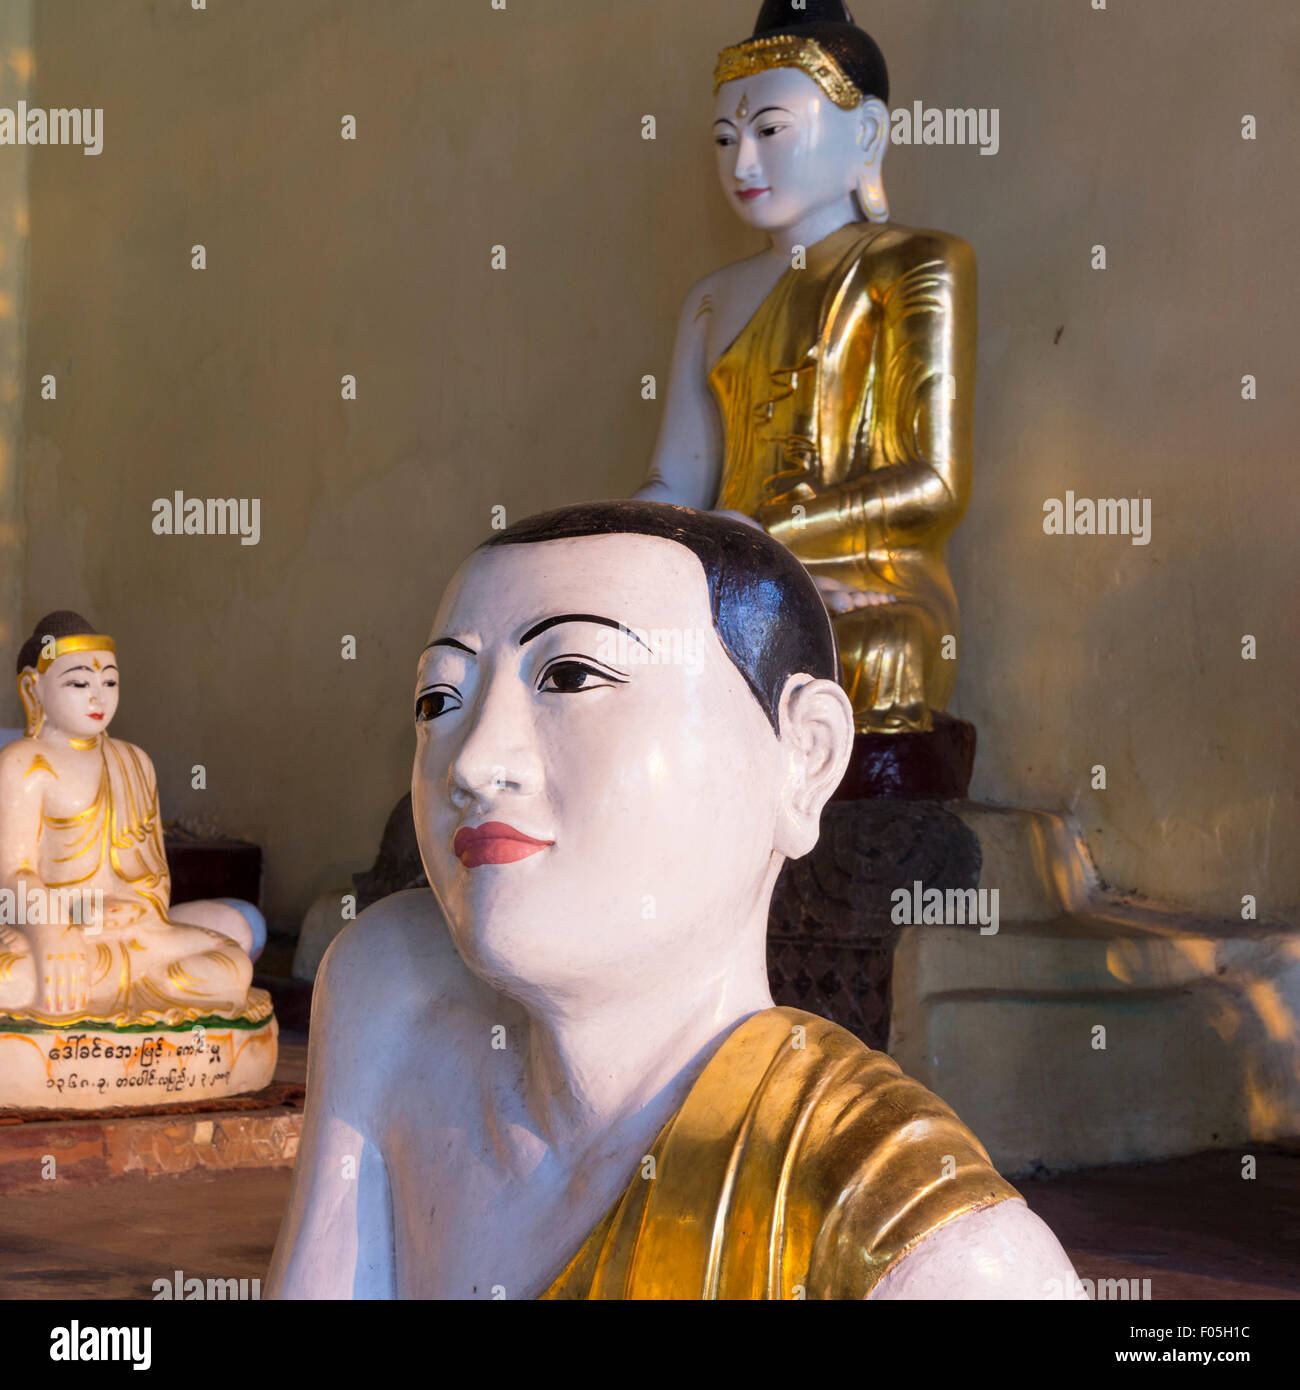 Buddha statues at Shwedagon Paya in Yangon, Myanmar. Foreground figure with atypical slanted shoulder pose and expressive face. Stock Photo